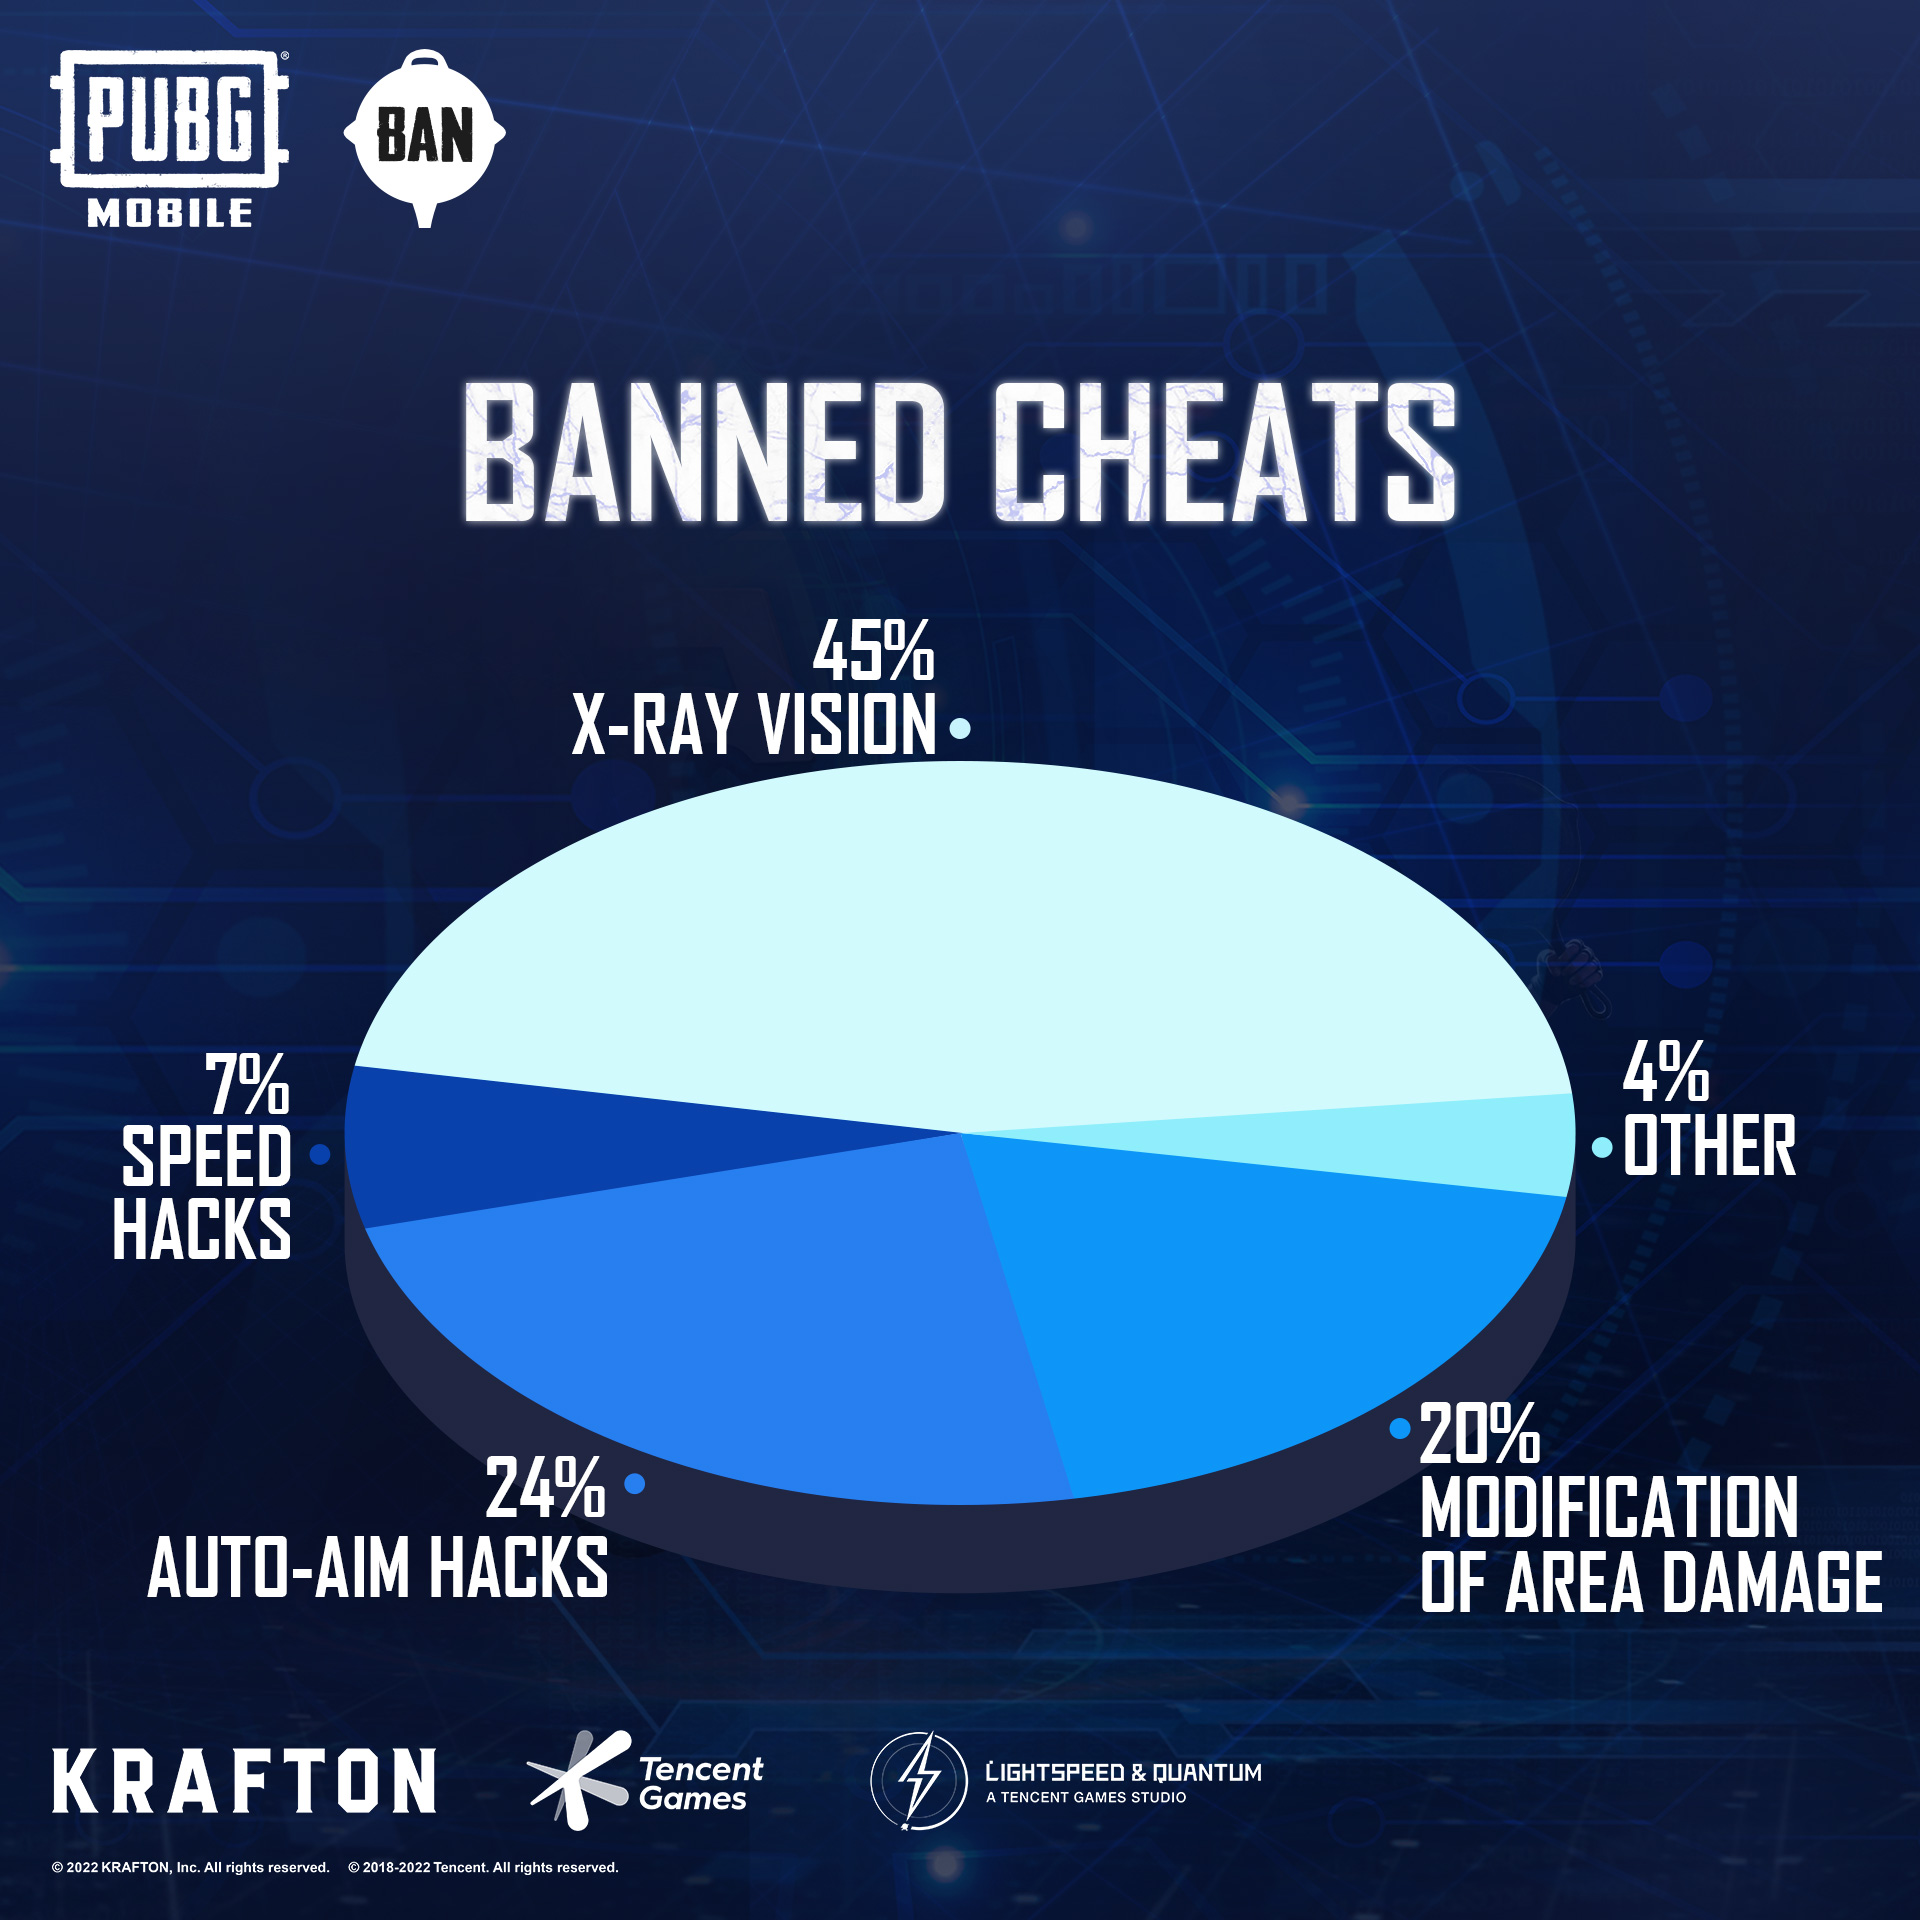 PUBG Mobile Ban Pan 2.0: Tencent suspended 450803 PUBGM accounts and 6612 devices for using cheats